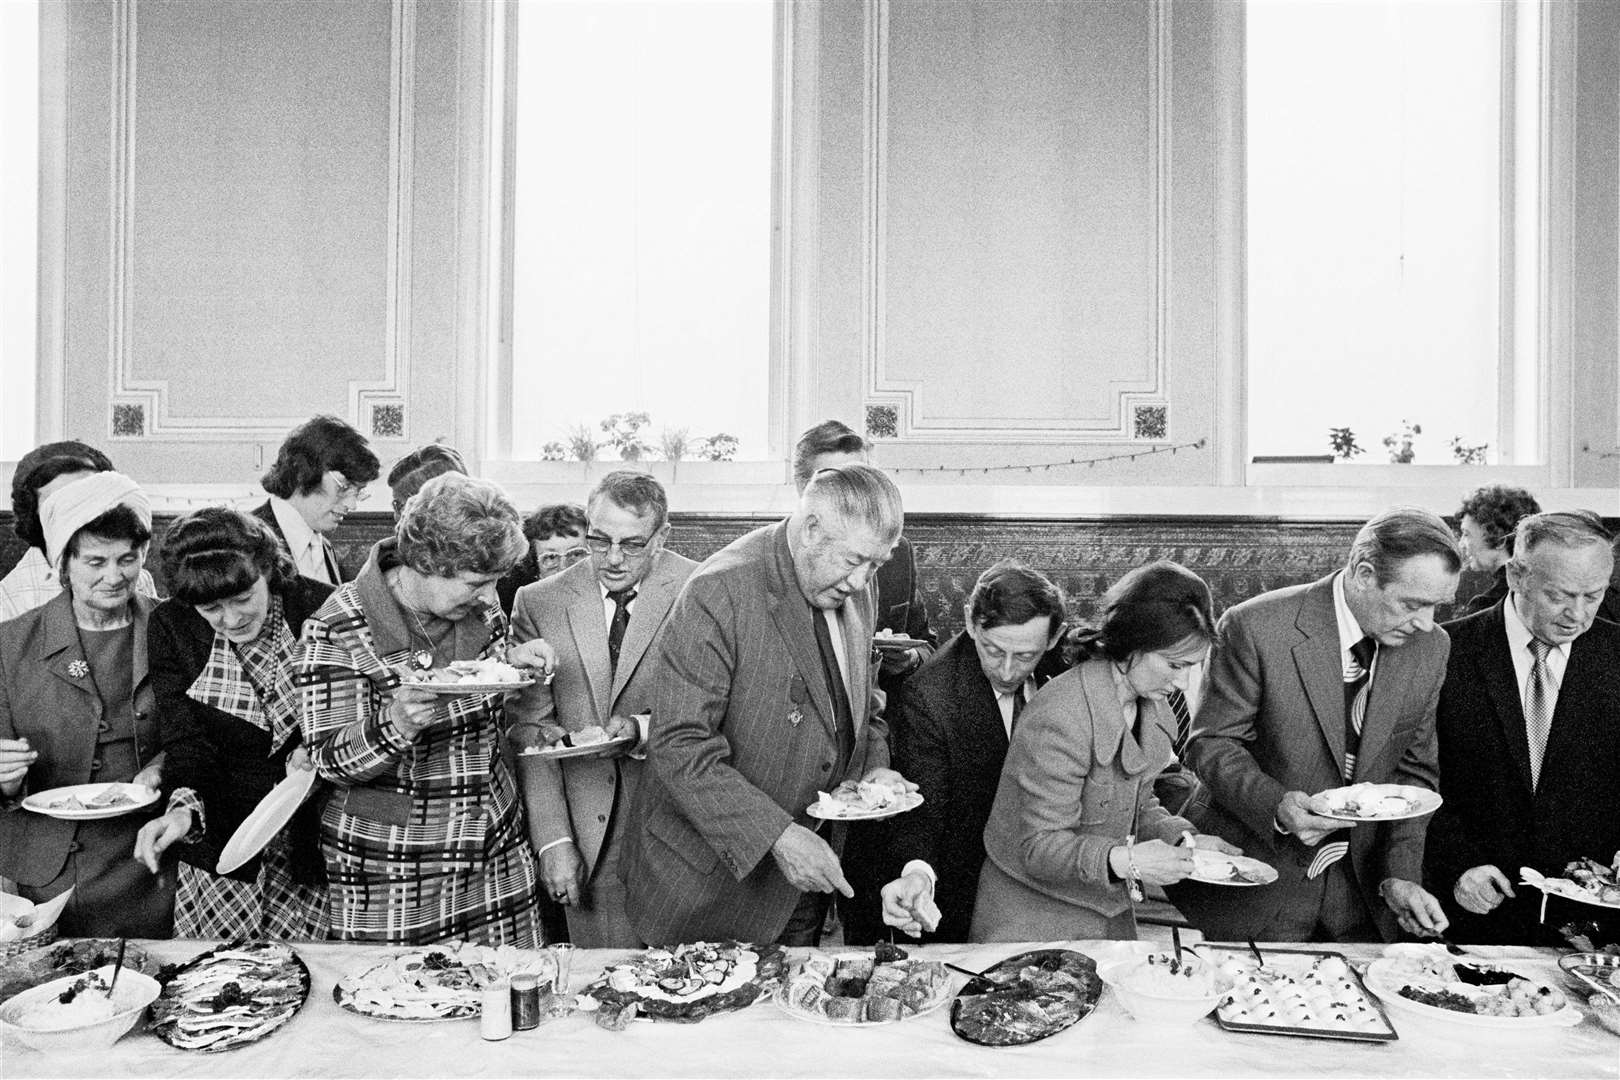 The Mayor of Todmorden's inaugural banquet, 1977, by Martin Parr